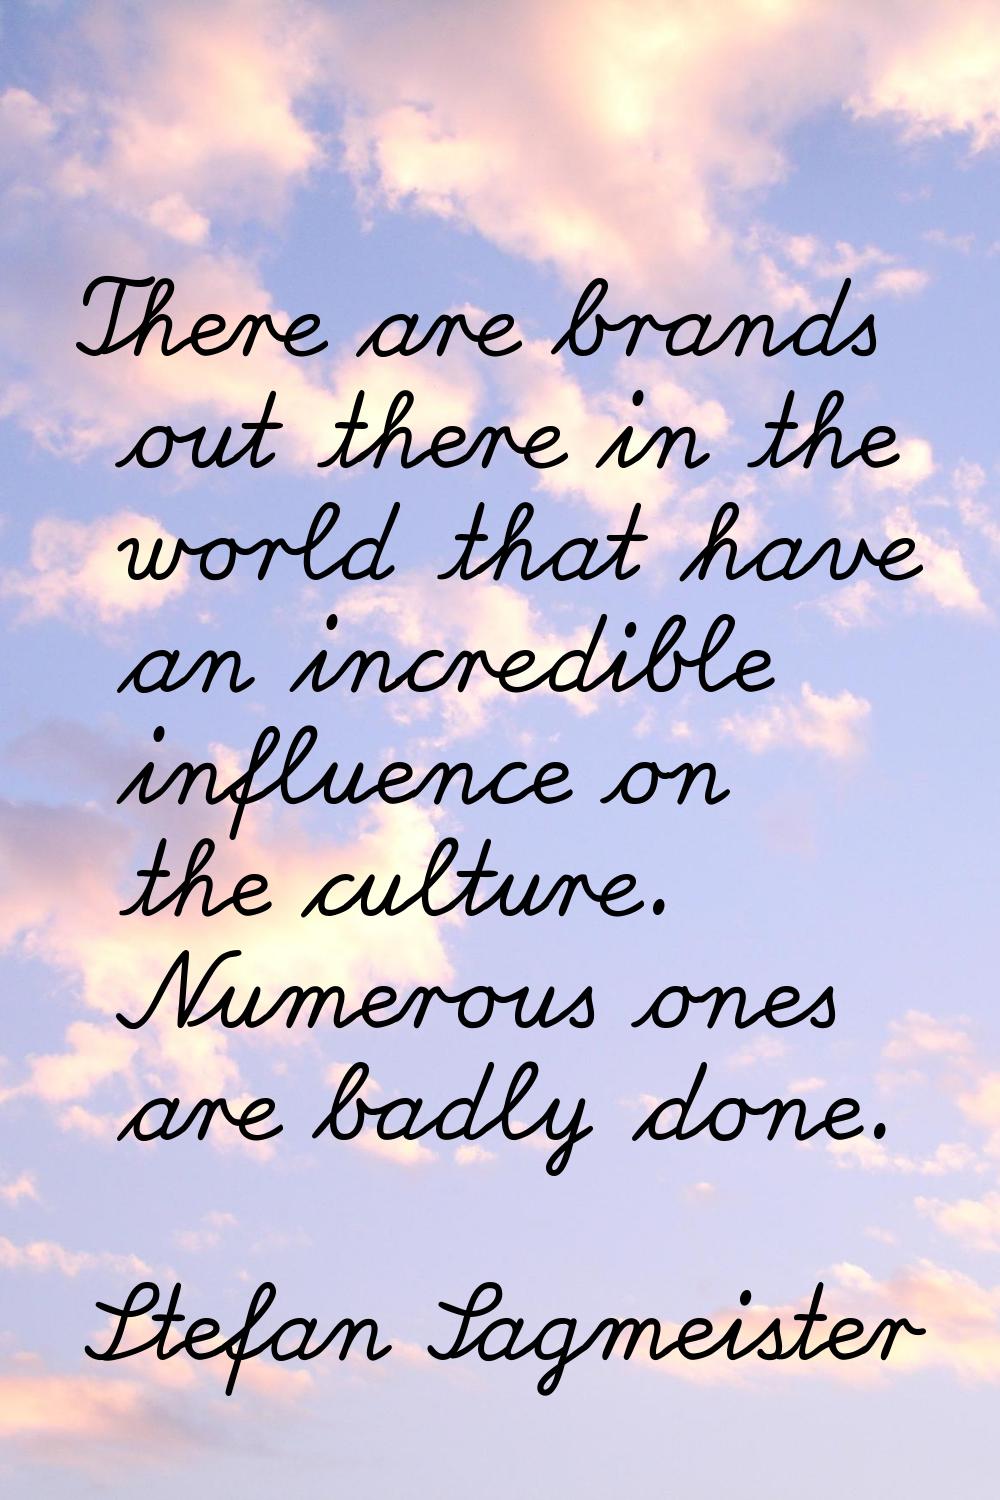 There are brands out there in the world that have an incredible influence on the culture. Numerous 